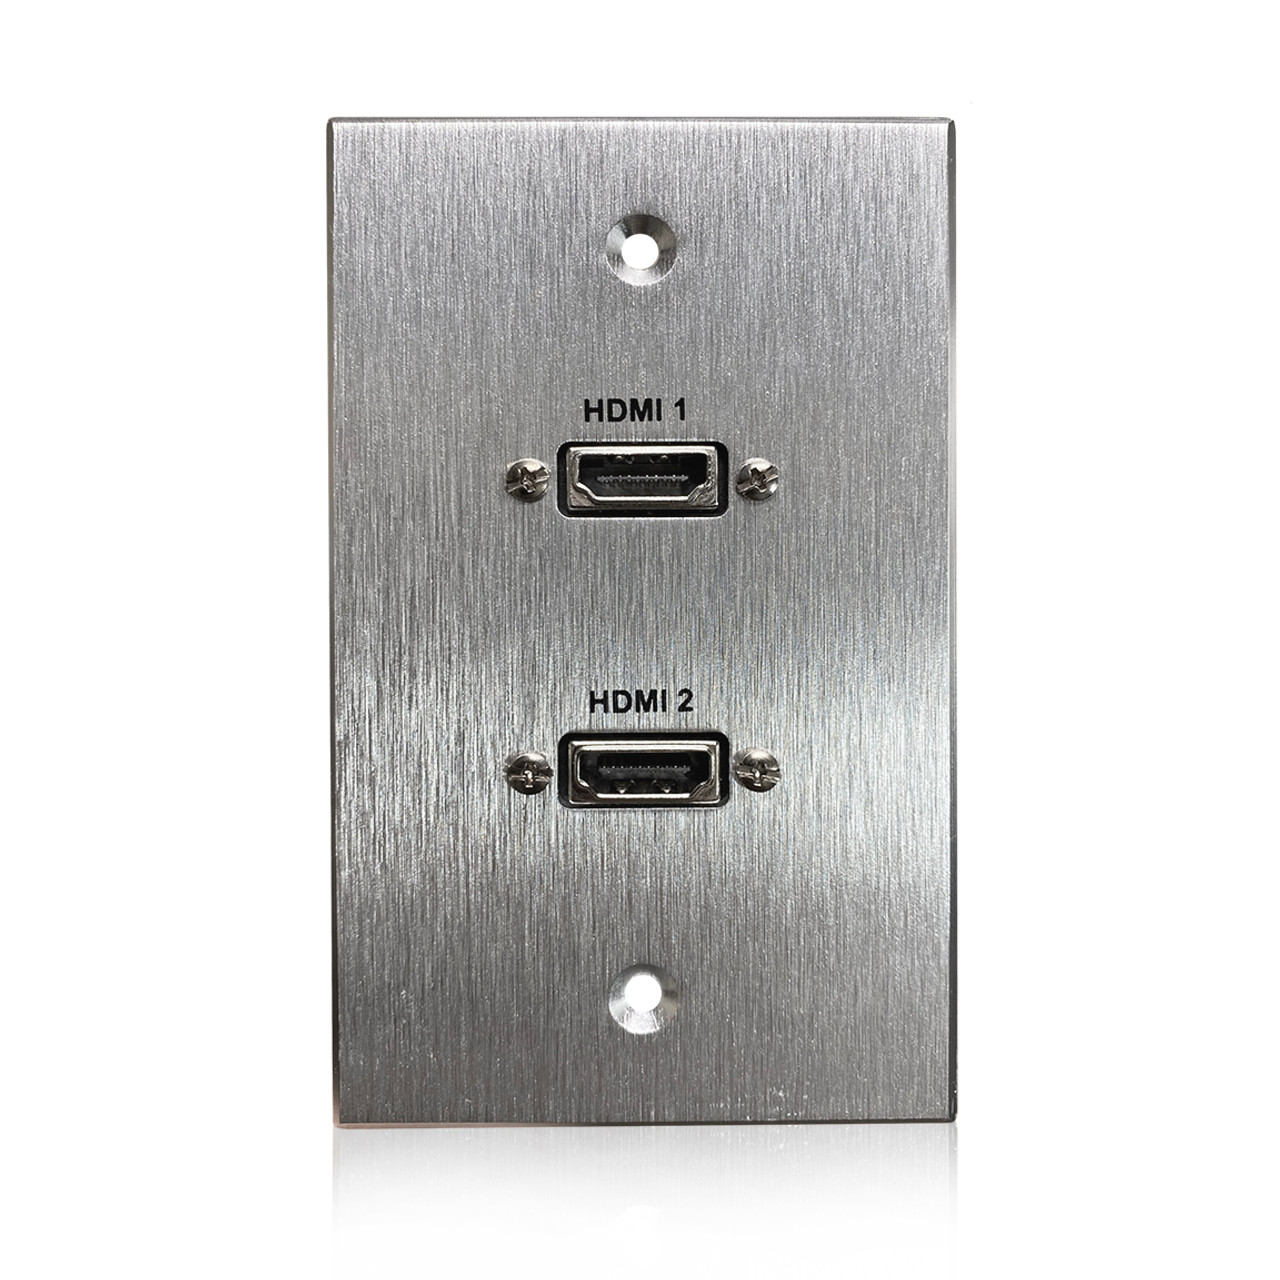 Dual HDMI Pass-Through Single Gang Aluminum Wall Plate with Pigtail